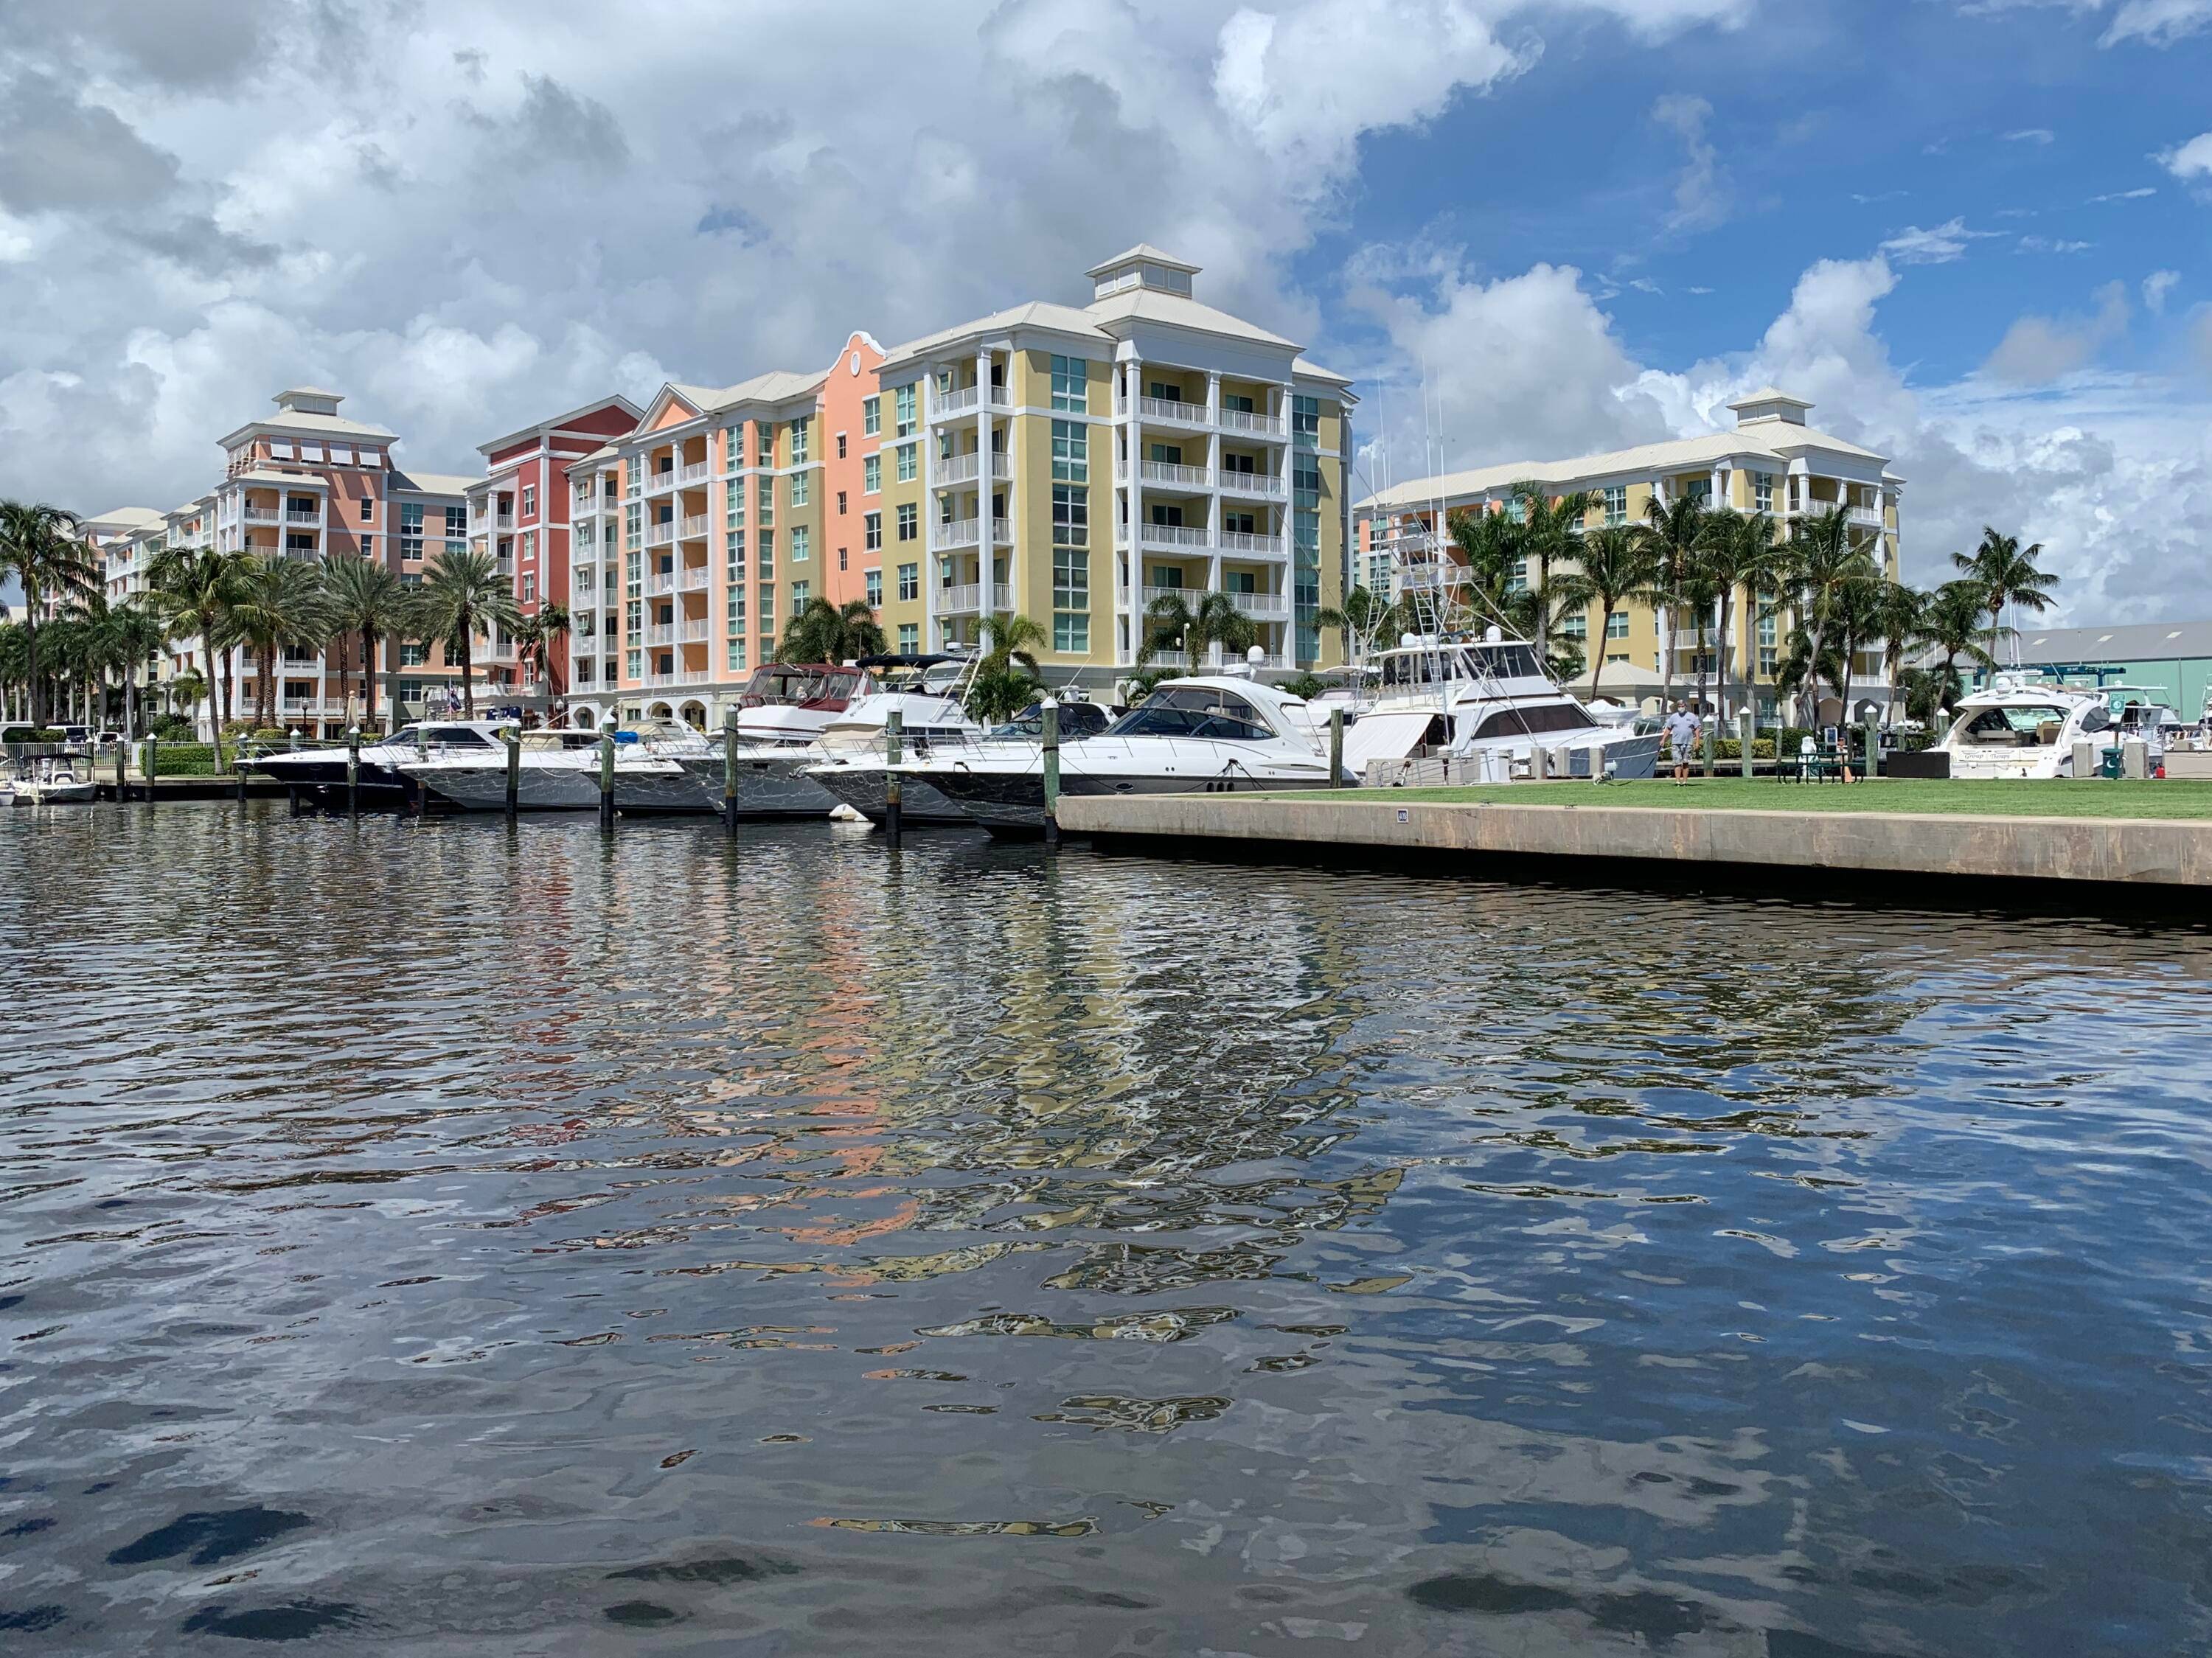 Beautiful Fully Furnished 3 Bedroom Waterfront Corner Penthouse Condo with Resort Style AmenitiesWelcome to your dream waterfront oasis !